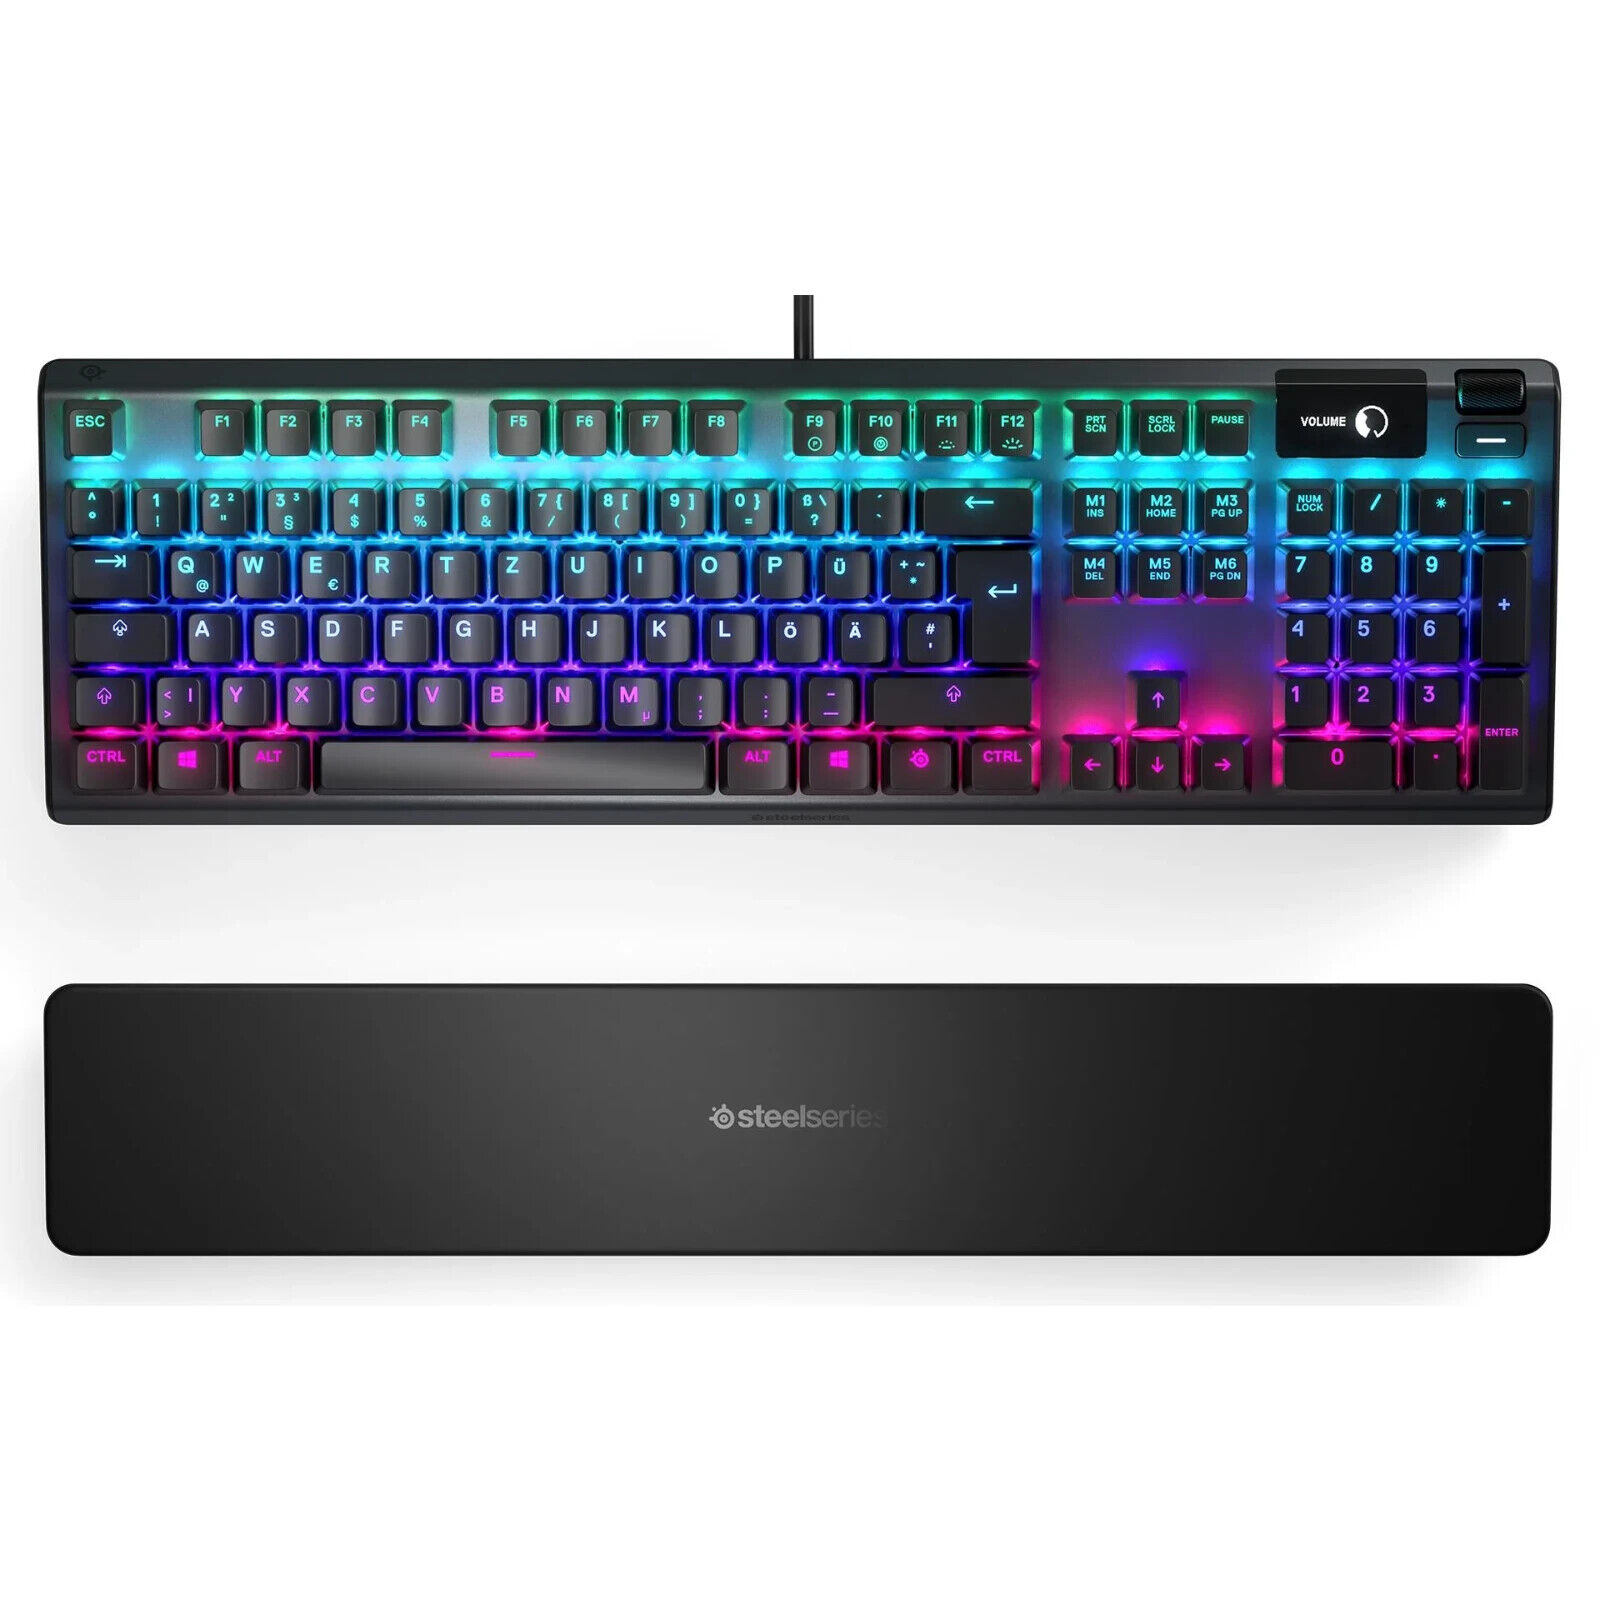 SteelSeries Apex 5 Hybrid Mechanical Gaming Keyboard for PC, mac, Xbox One, PS4